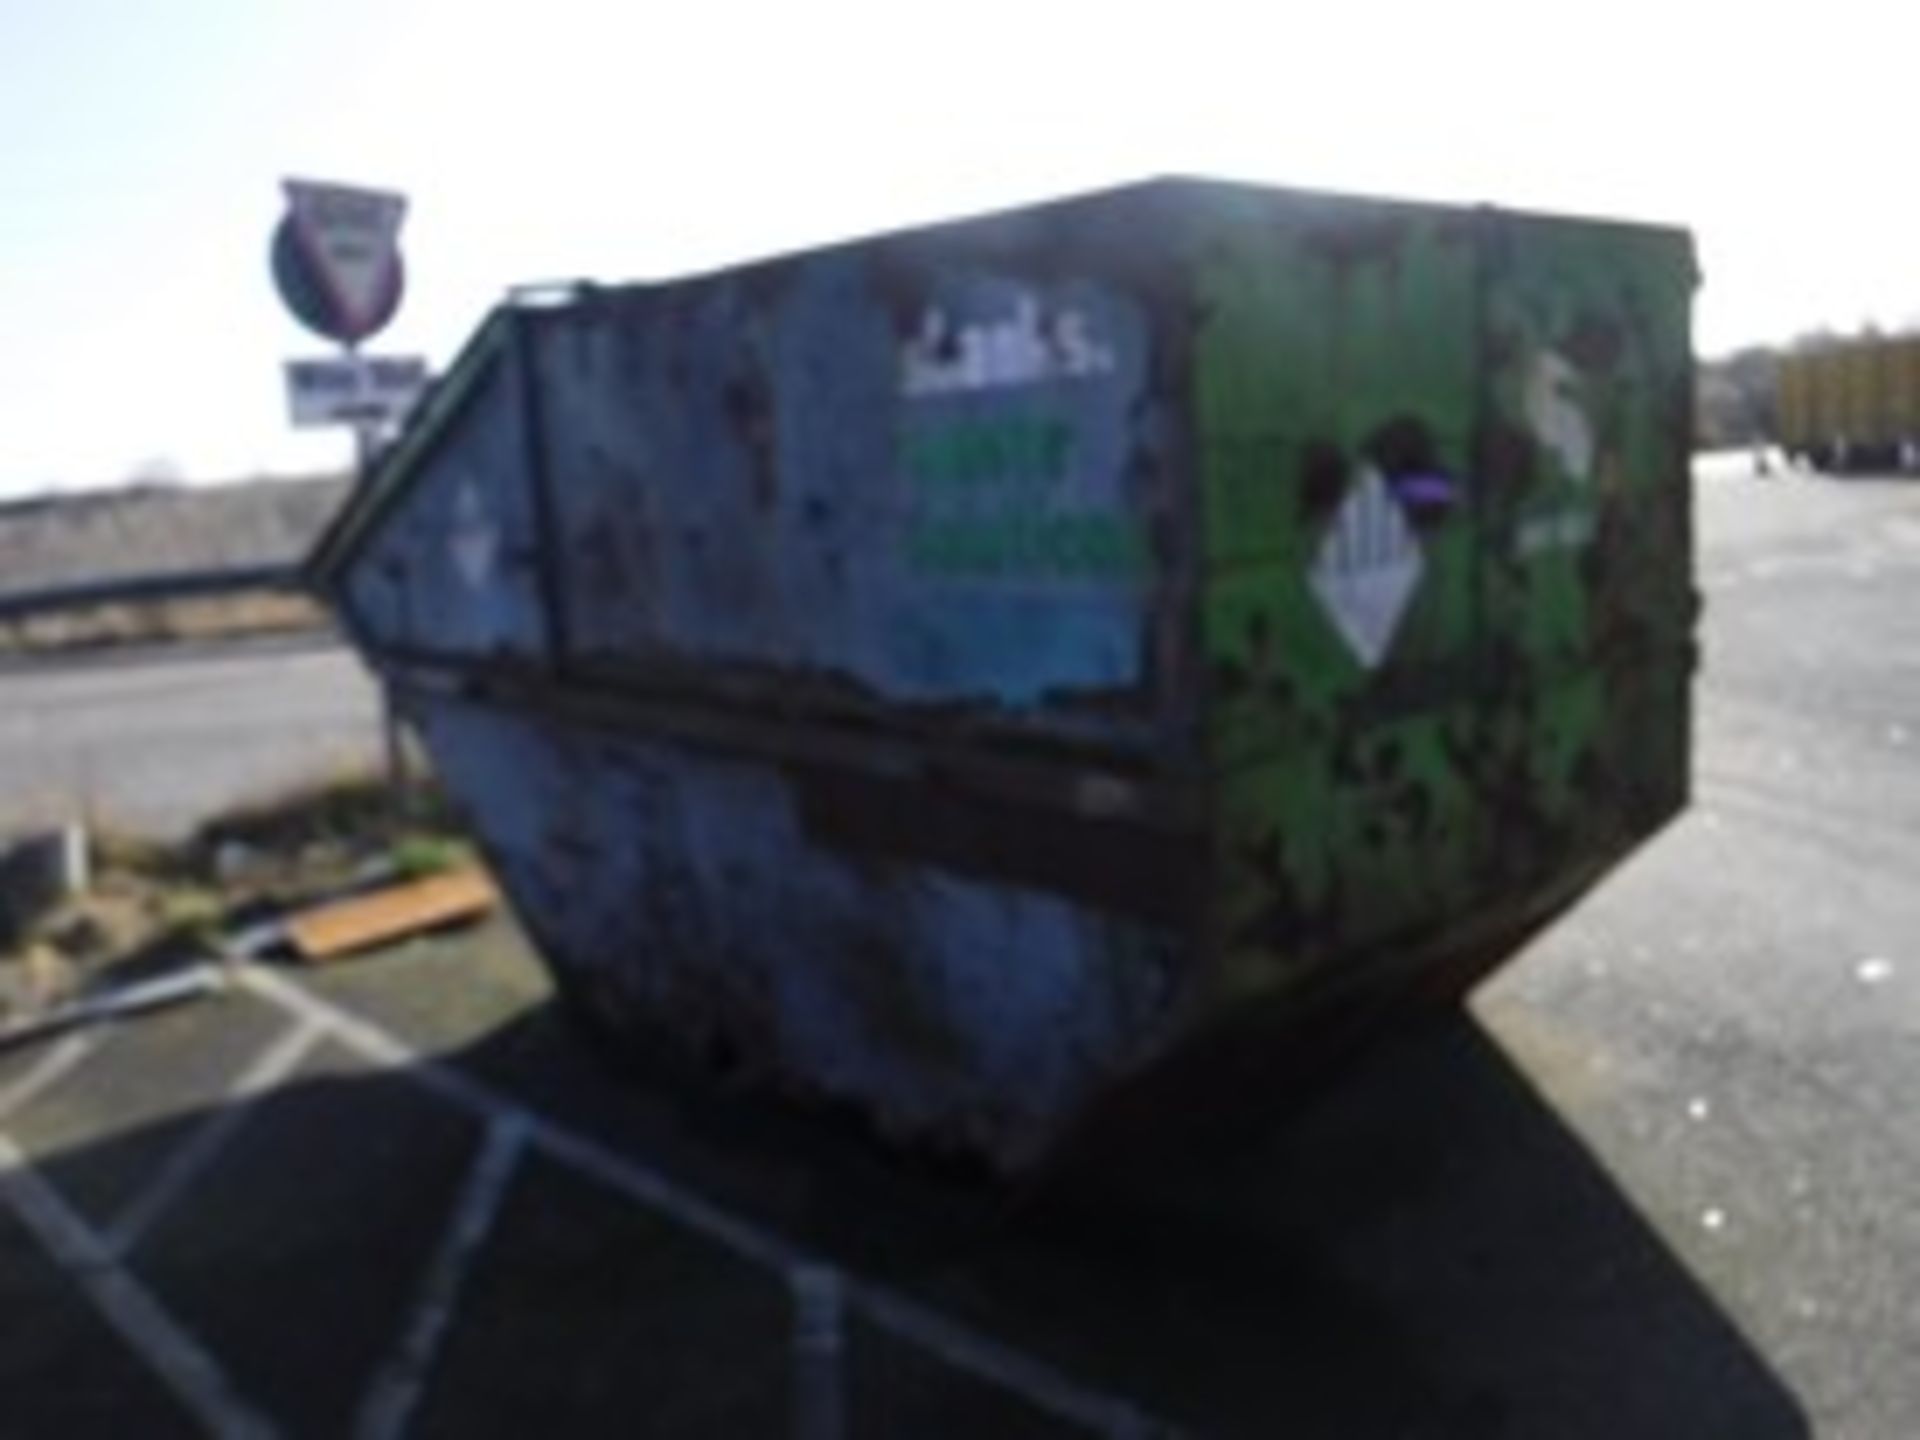 CLOSED SKIP. VIDEO OF ALL SKIPS CAN BE EMAILED TO YOU BY CONTACTING JONNY.BELL@MORRISLESLIE.CO.UK. V - Image 2 of 2